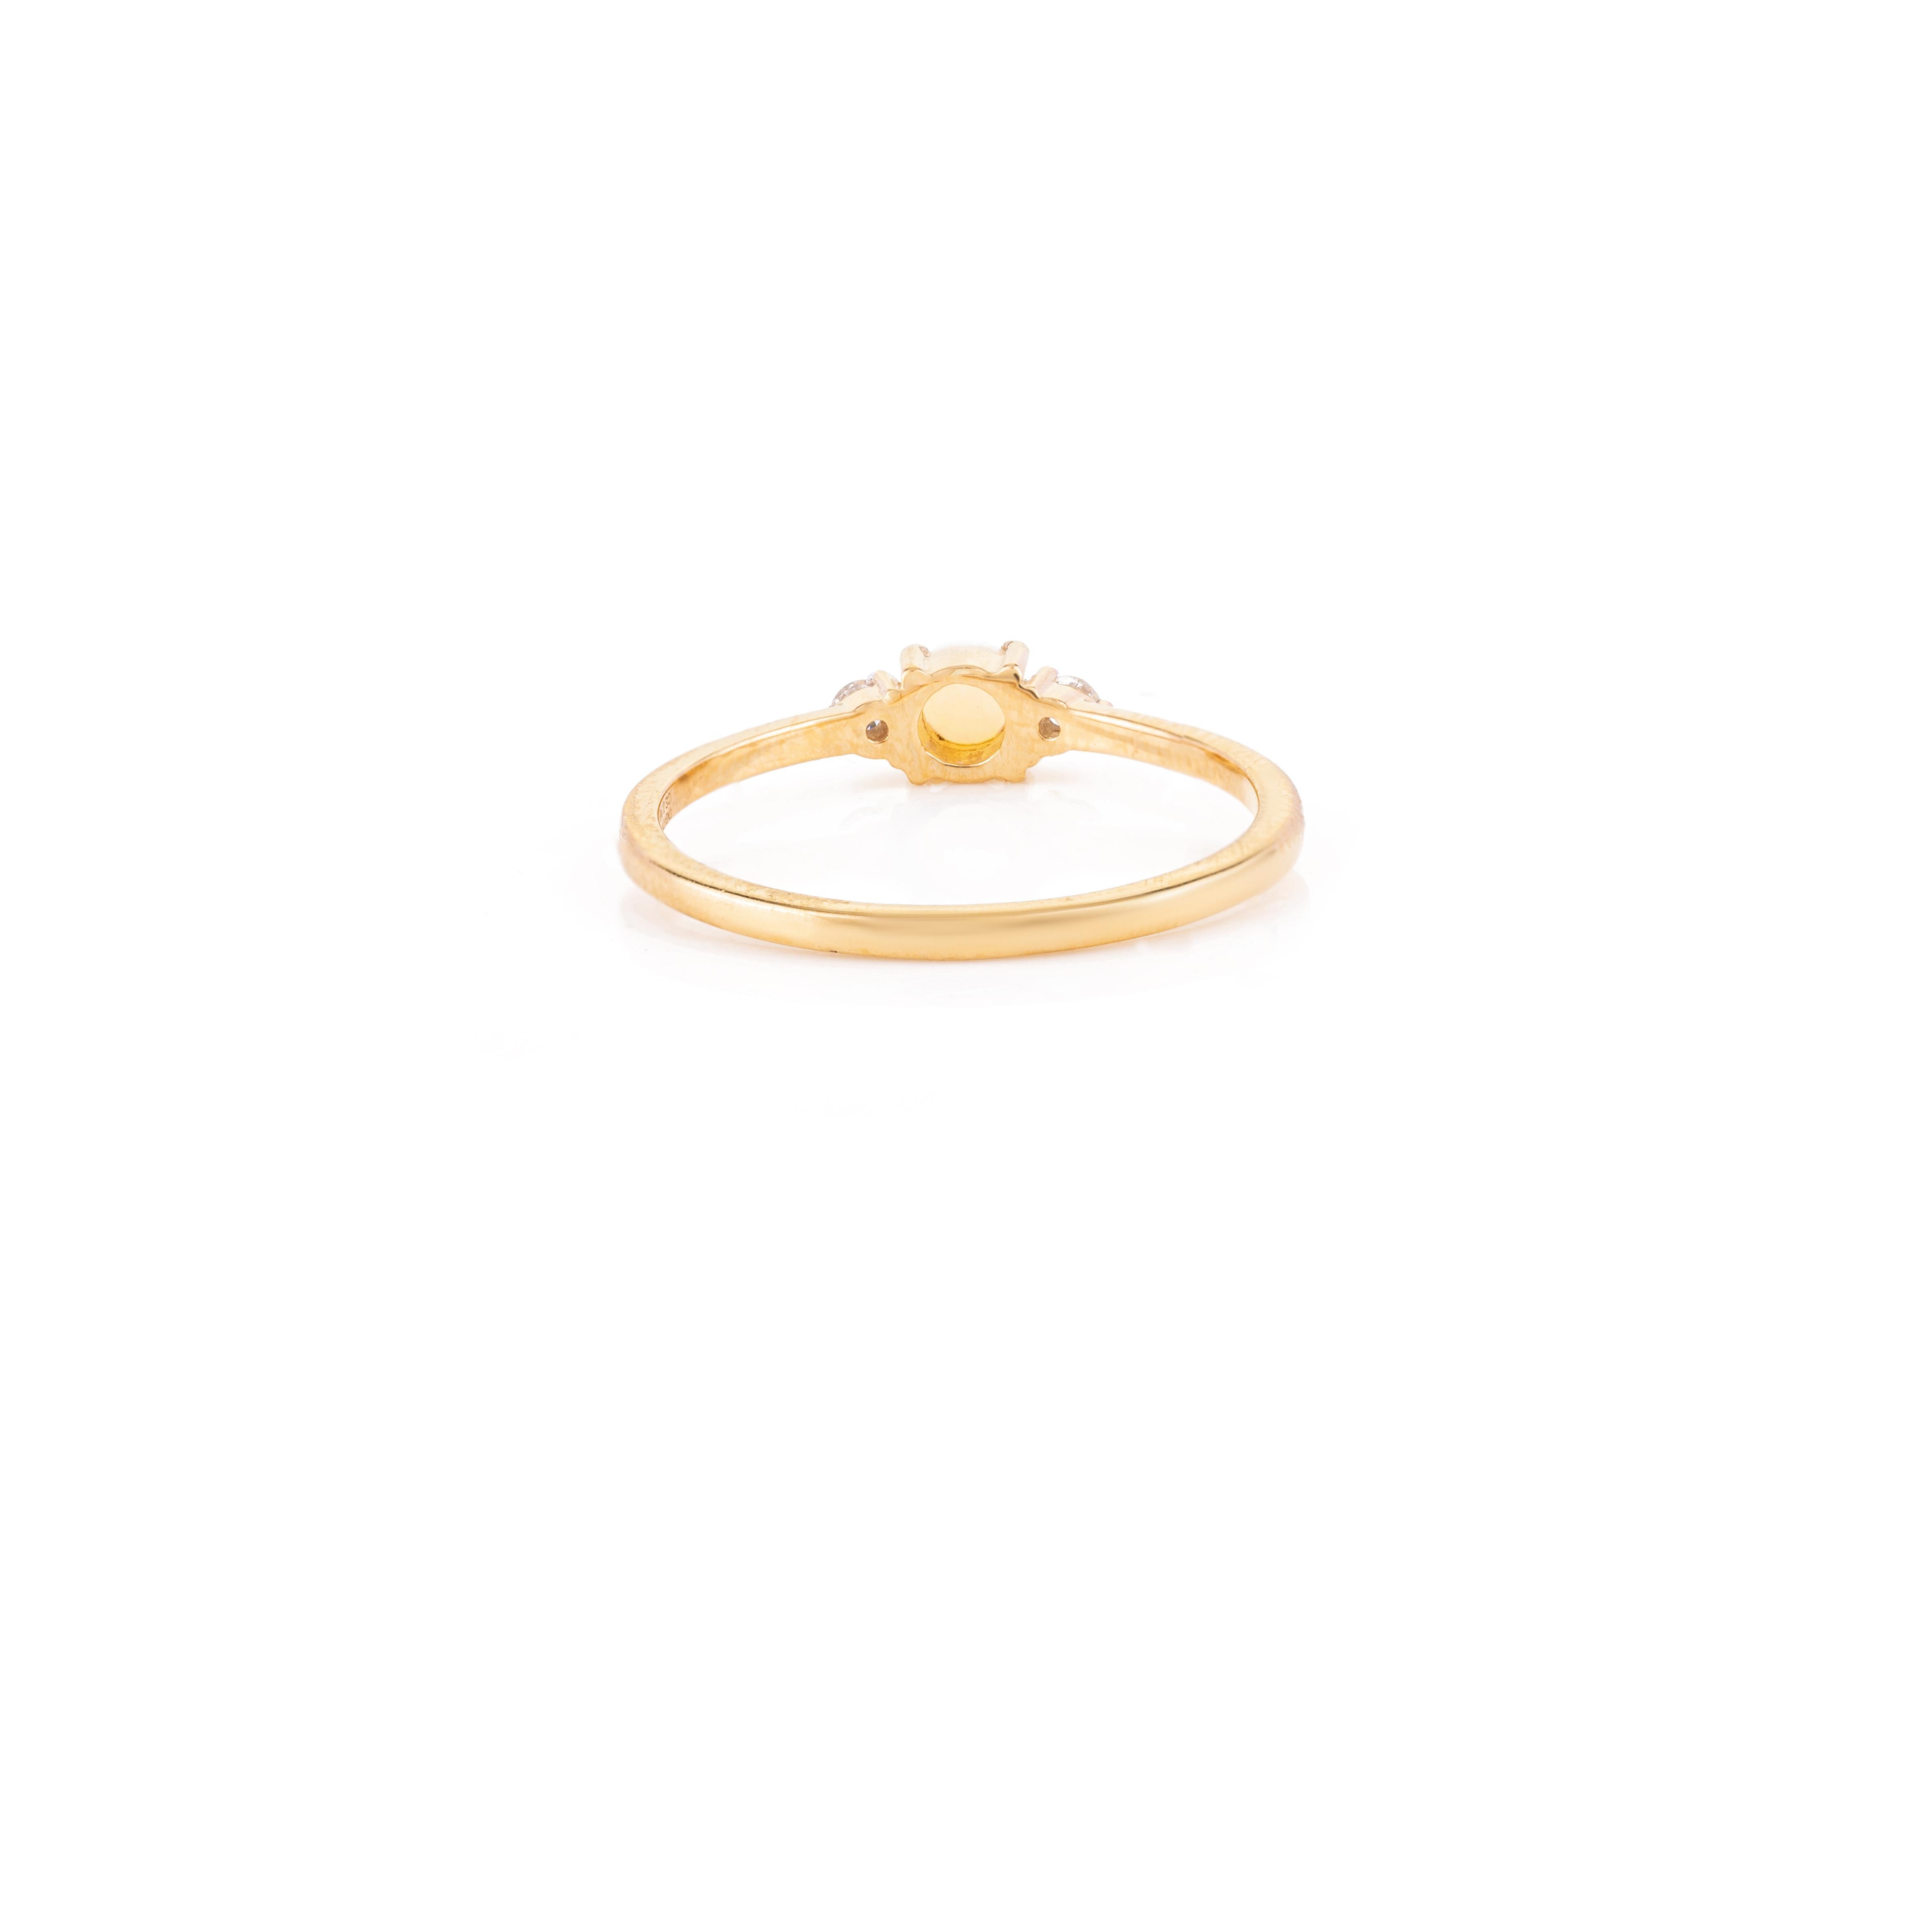 For Sale:  Minimal 18k Yellow Gold Opal Diamond Everyday Stackable Ring Gift 7